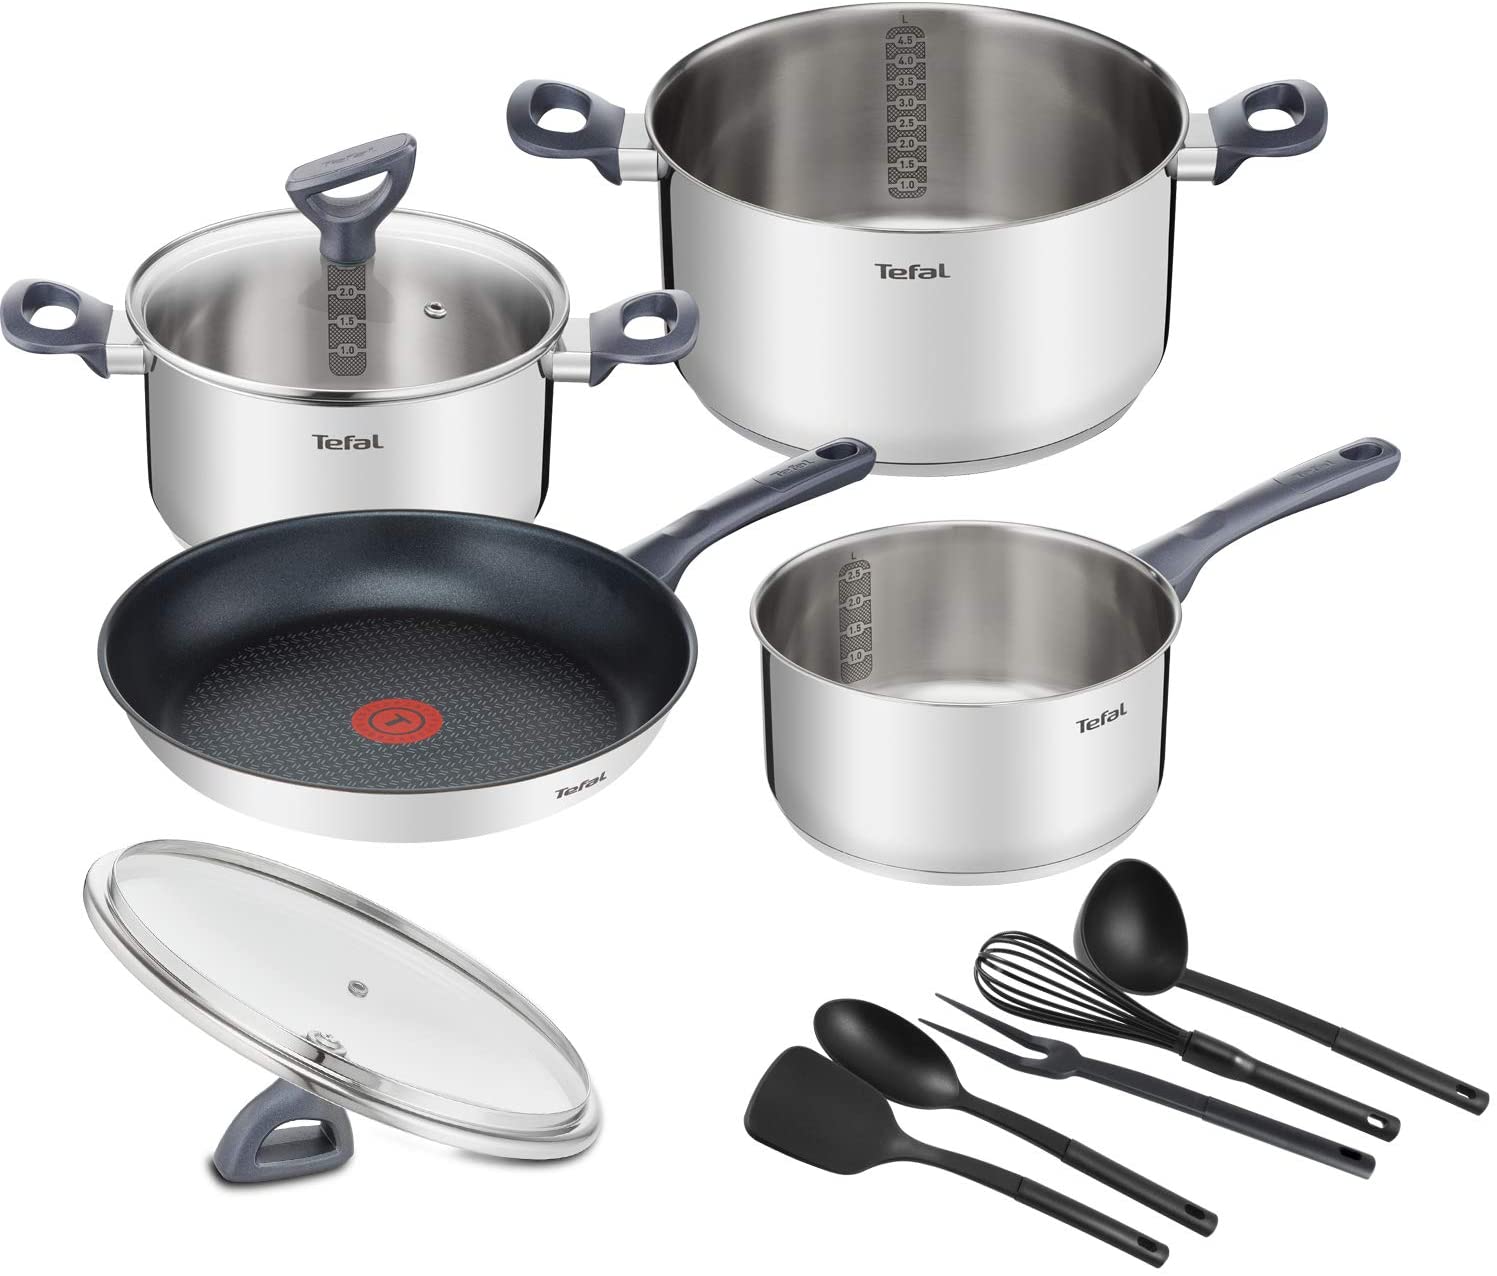 Tefal DAILY COOK Cookware Set G713SB 11 Pieces (Saucepan 16 cm, Cooking Pots 20/24 cm with Lids, Frying Pan 28 cm, Whisk, Ladle, Spoon, Spatula, Meat Fork All Cooker Types